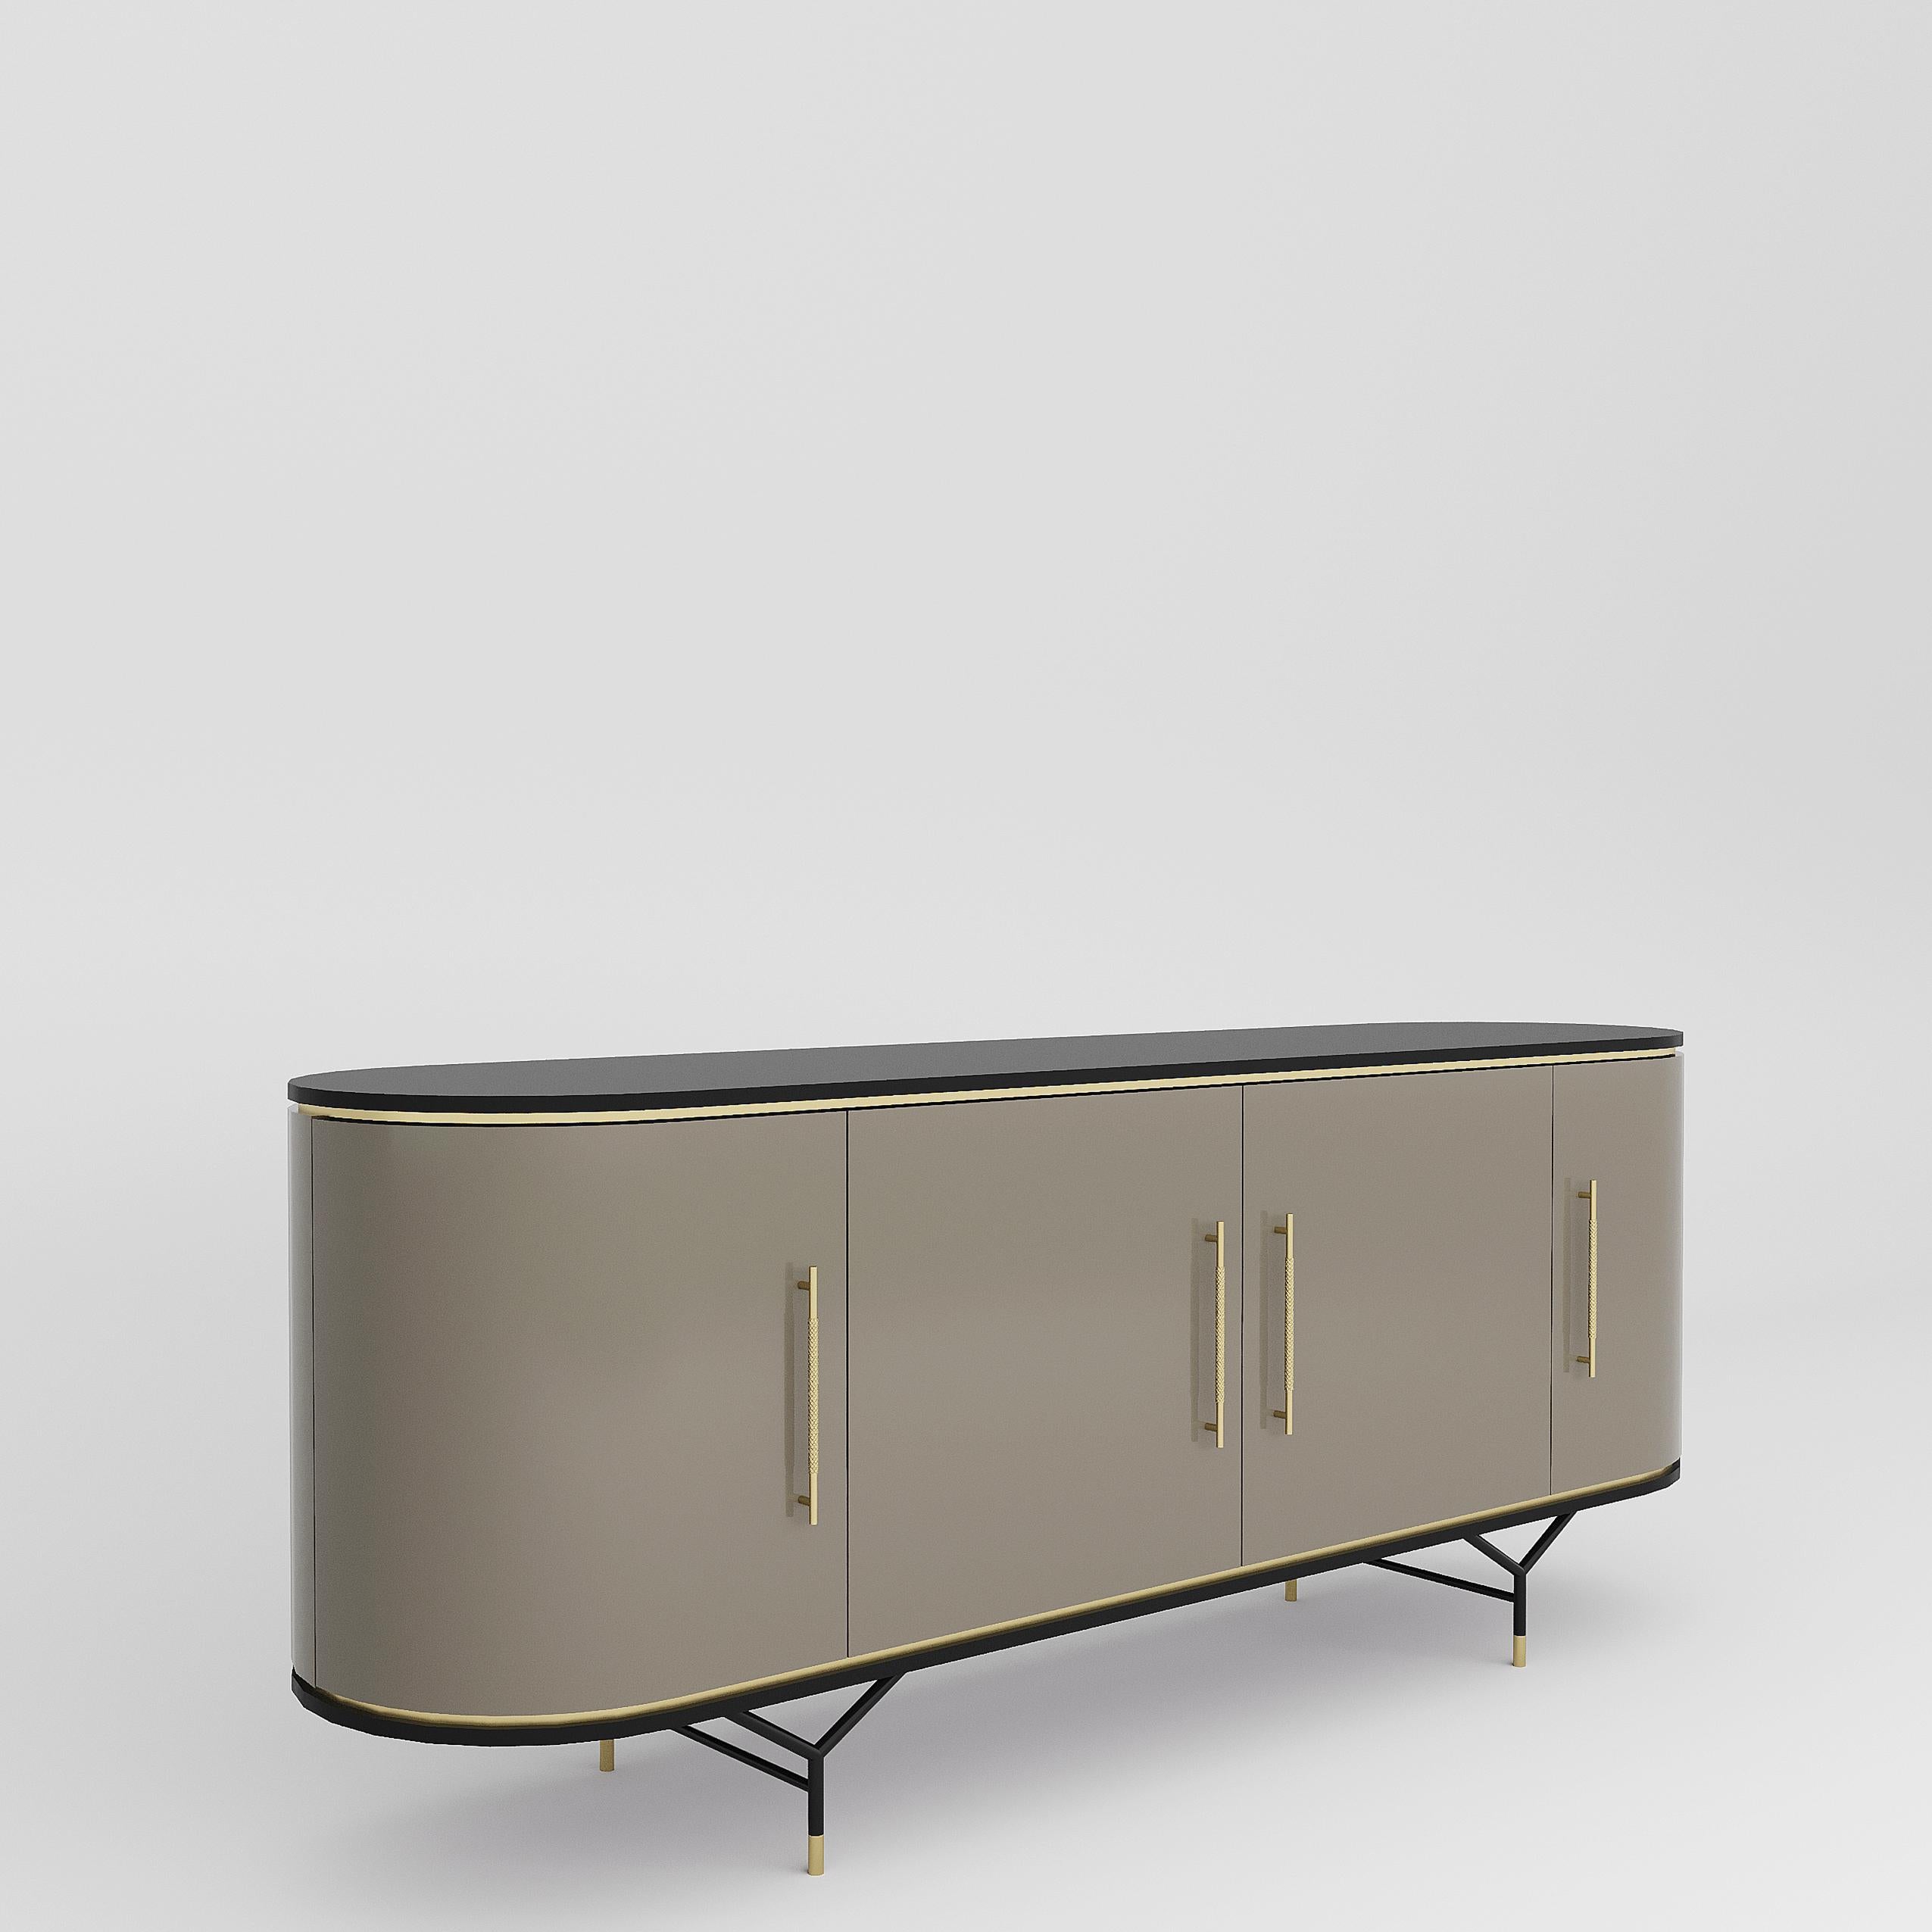 BOGART wood sideboard with Brass handles In New Condition For Sale In Frazão, Porto